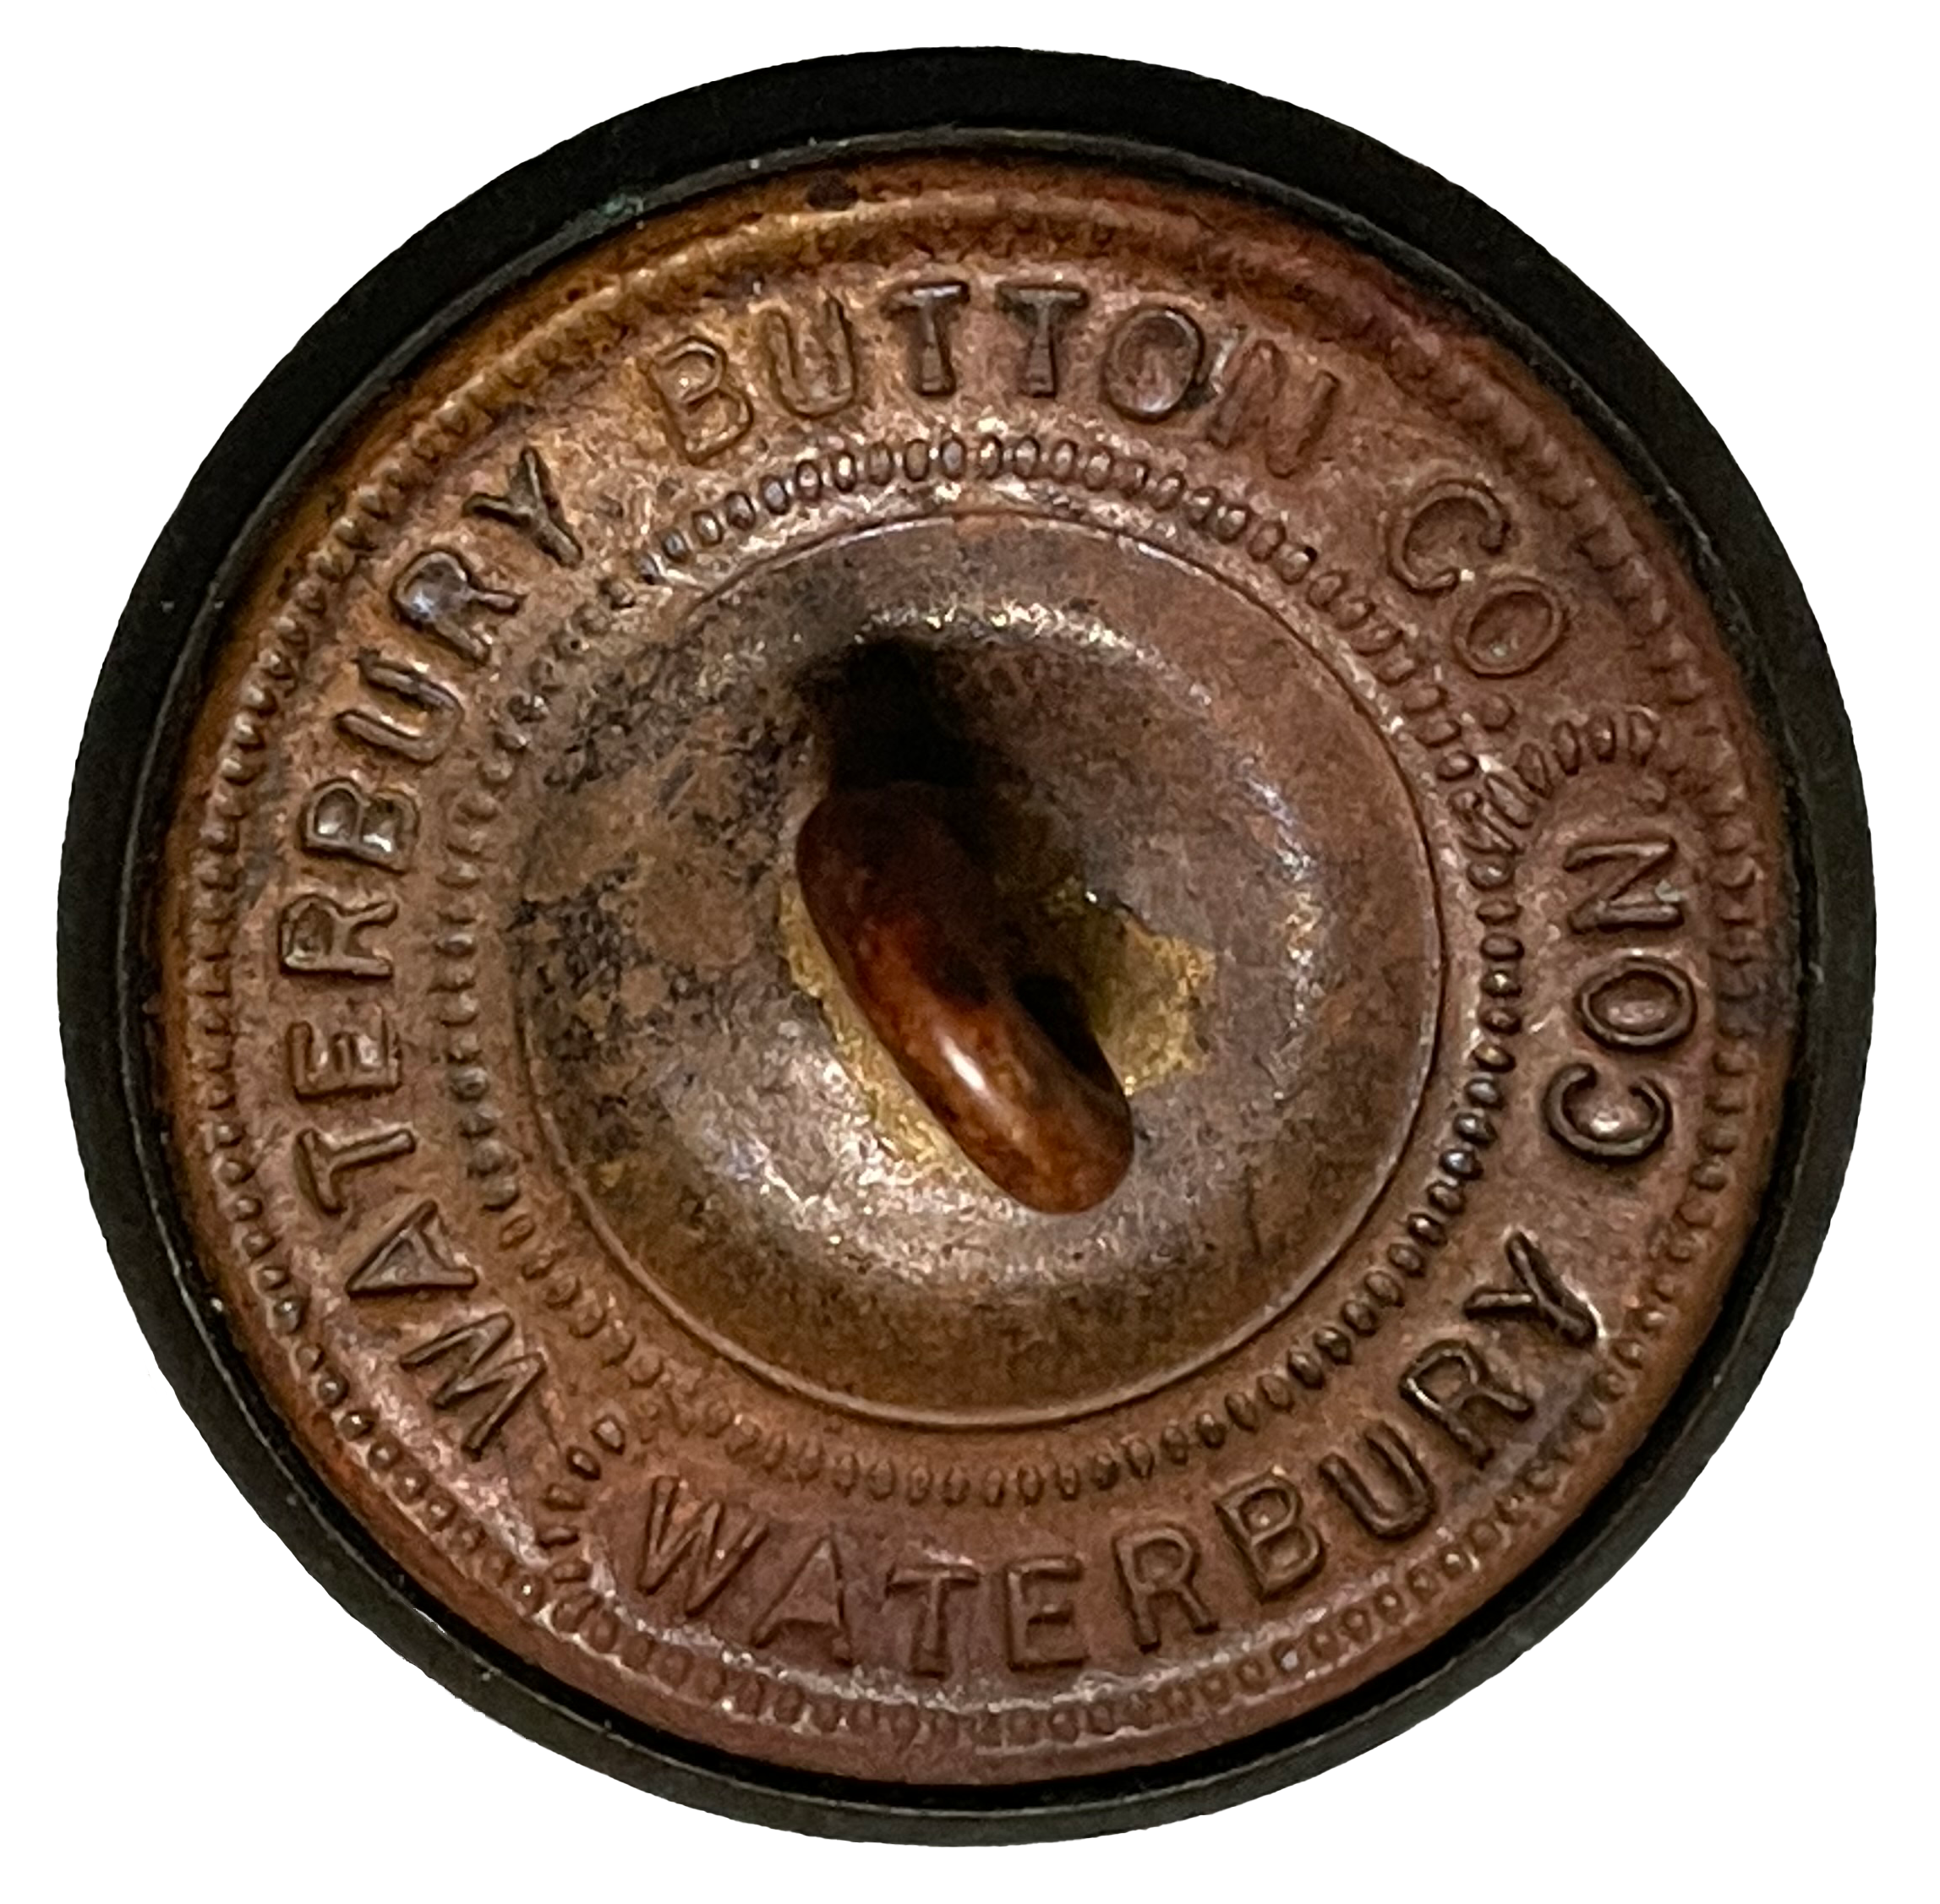 Back of a button marked Waterbury Button Co. Waterbury Con.